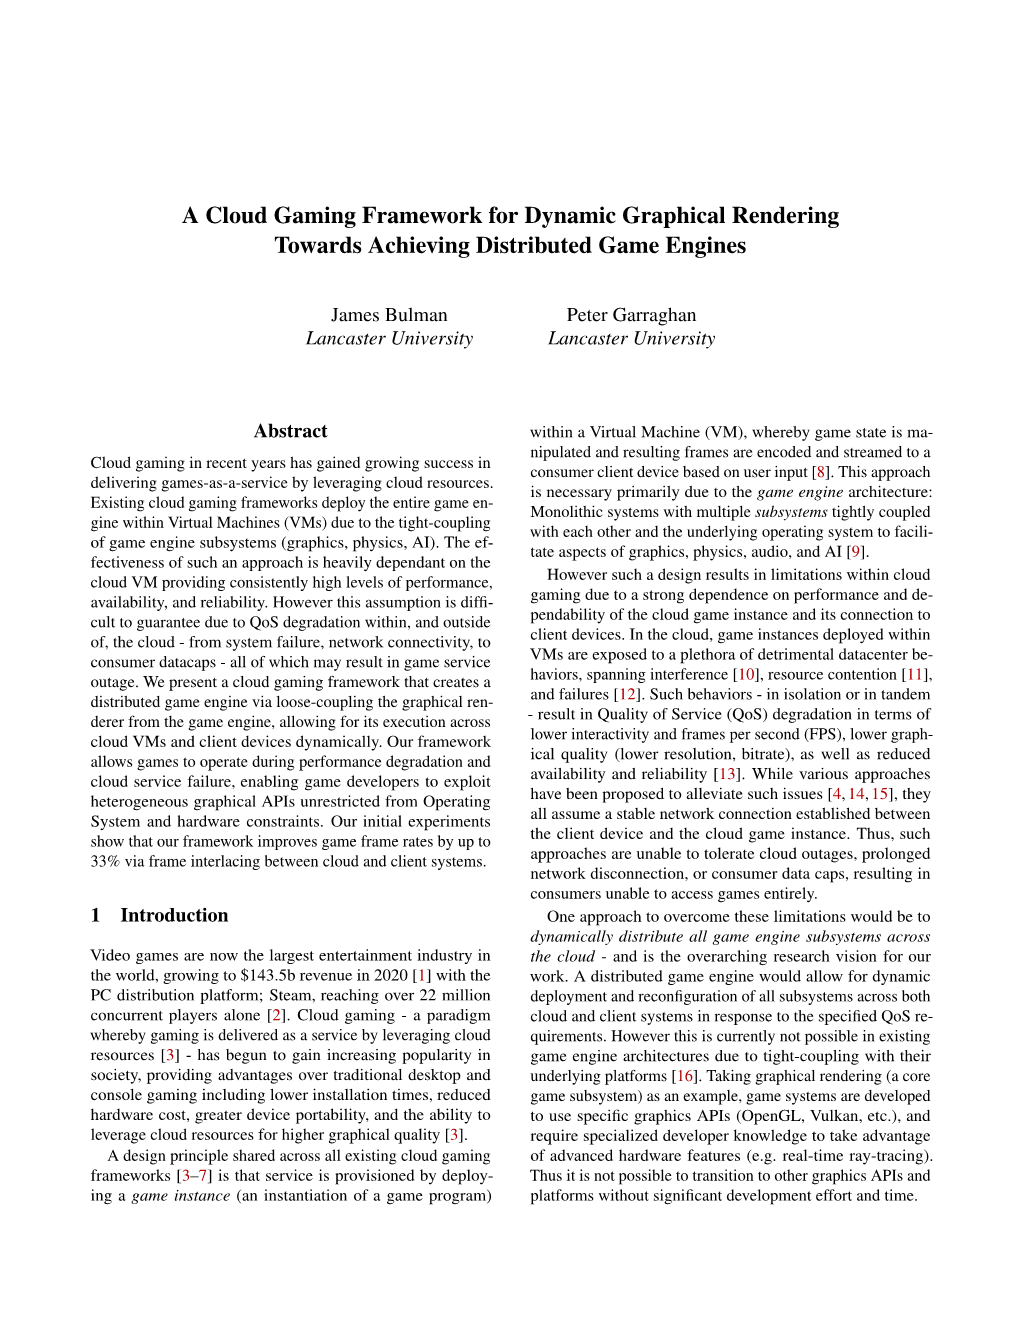 Cloud Gaming Framework for Dynamic Graphical Rendering Towards Achieving Distributed Game Engines